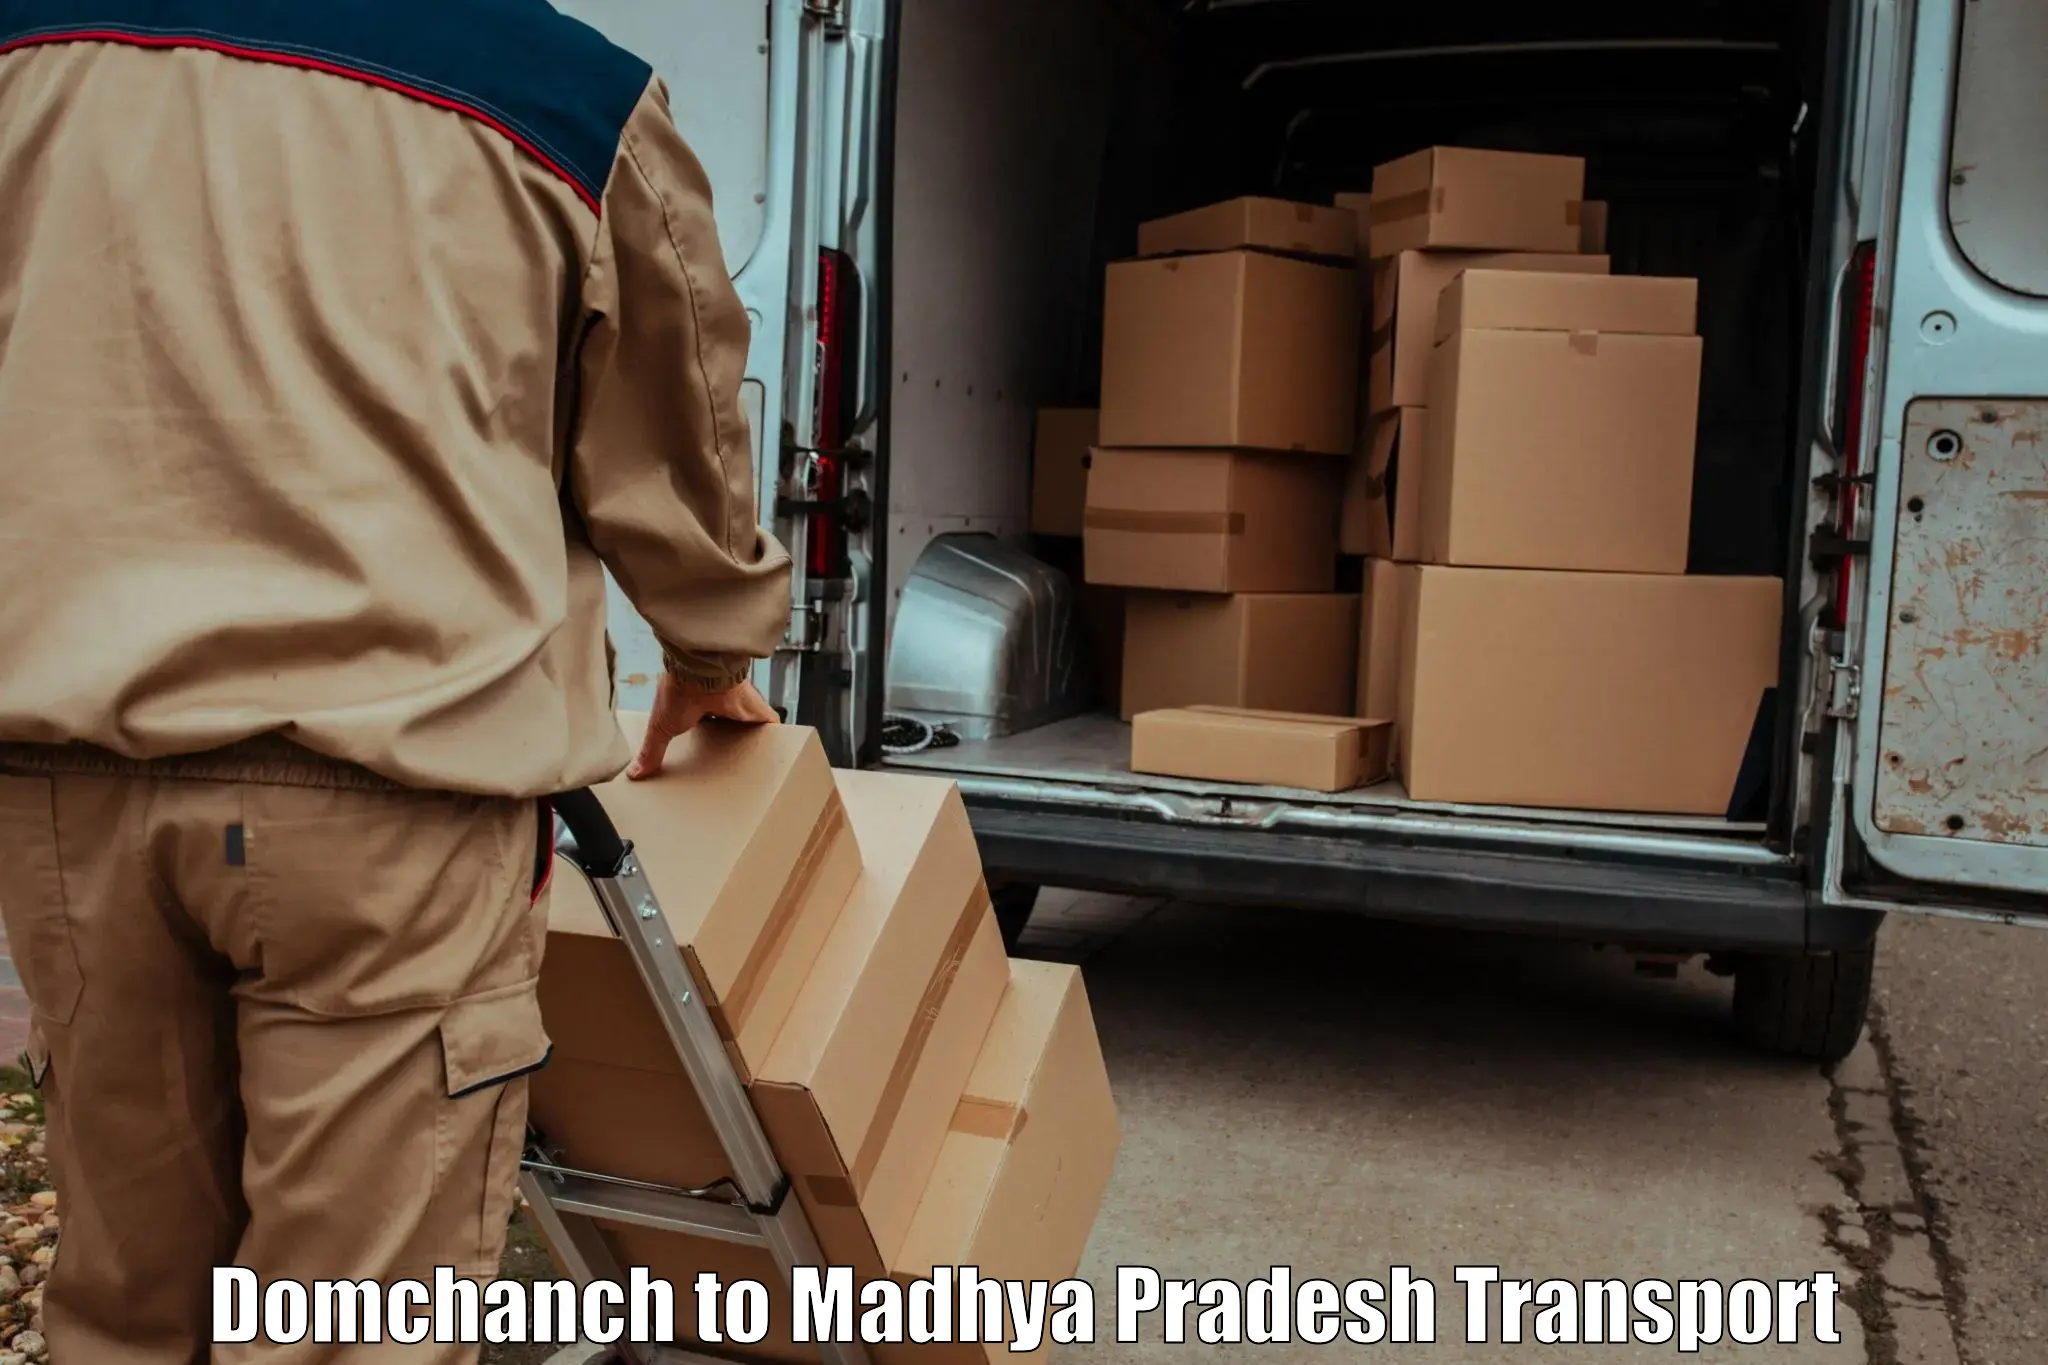 Air freight transport services in Domchanch to Madwas